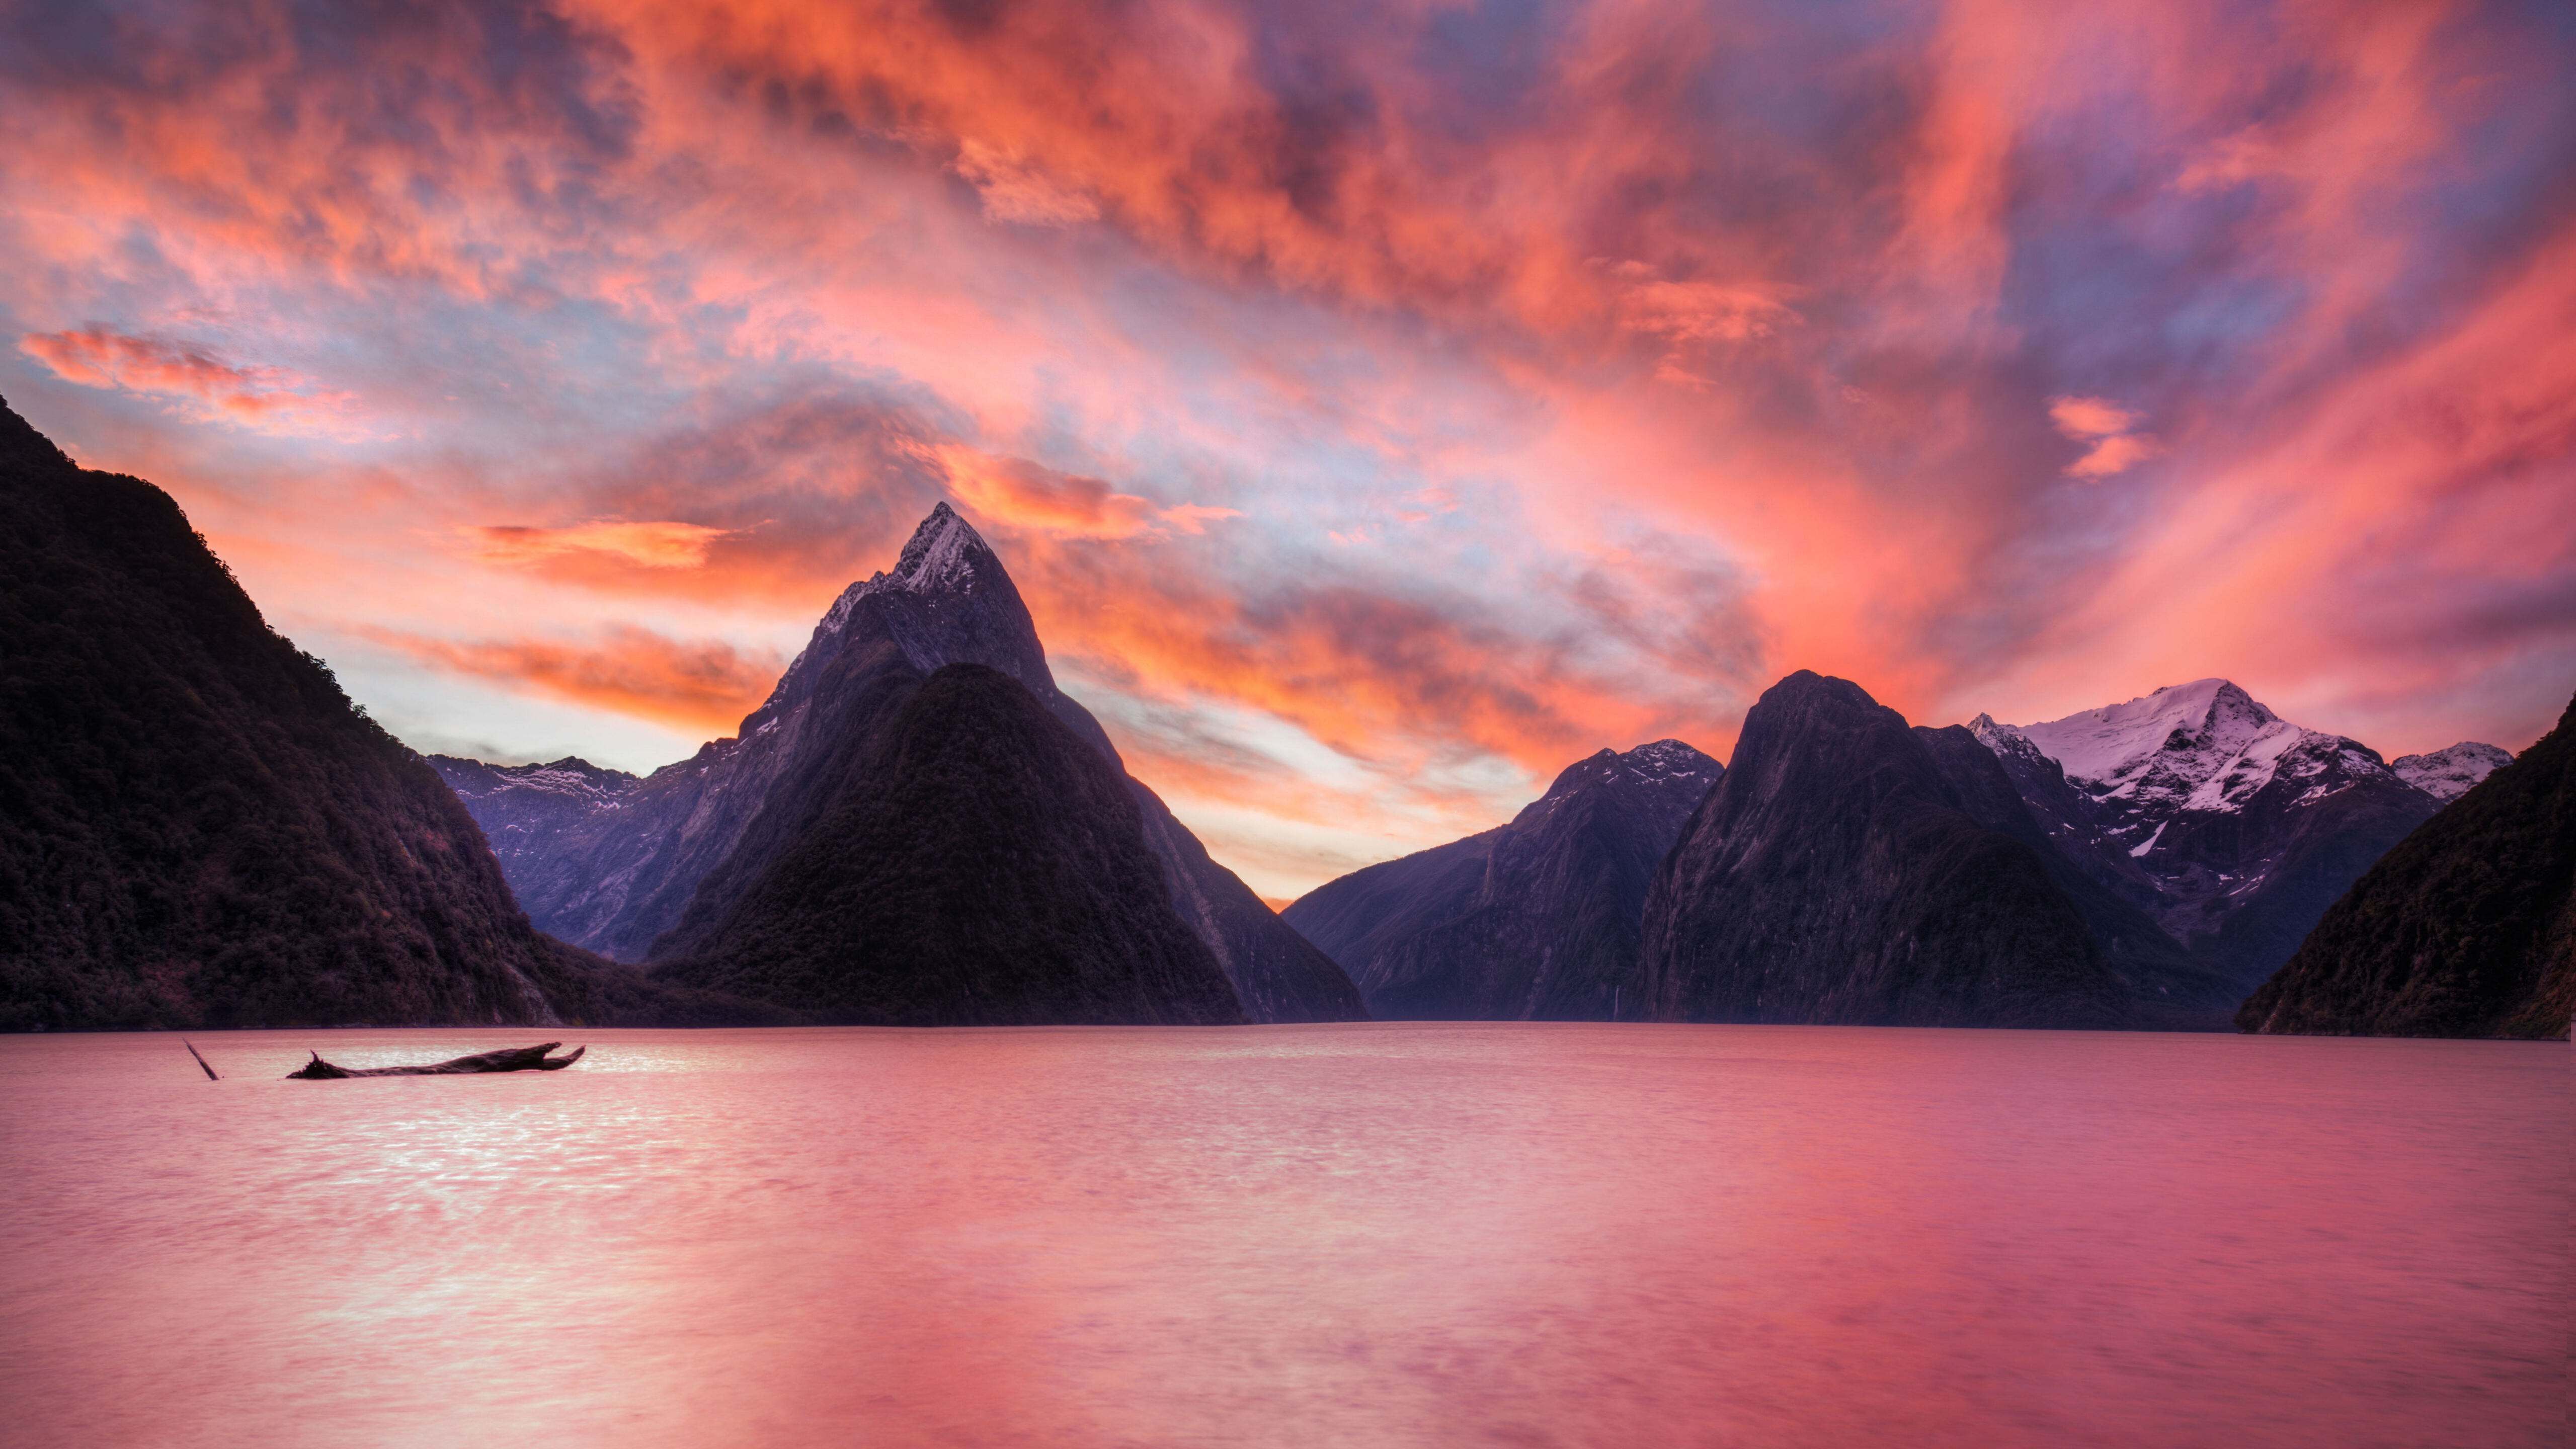 Nature New Zealand Milford Sound Mountains Sunset 5120x2880